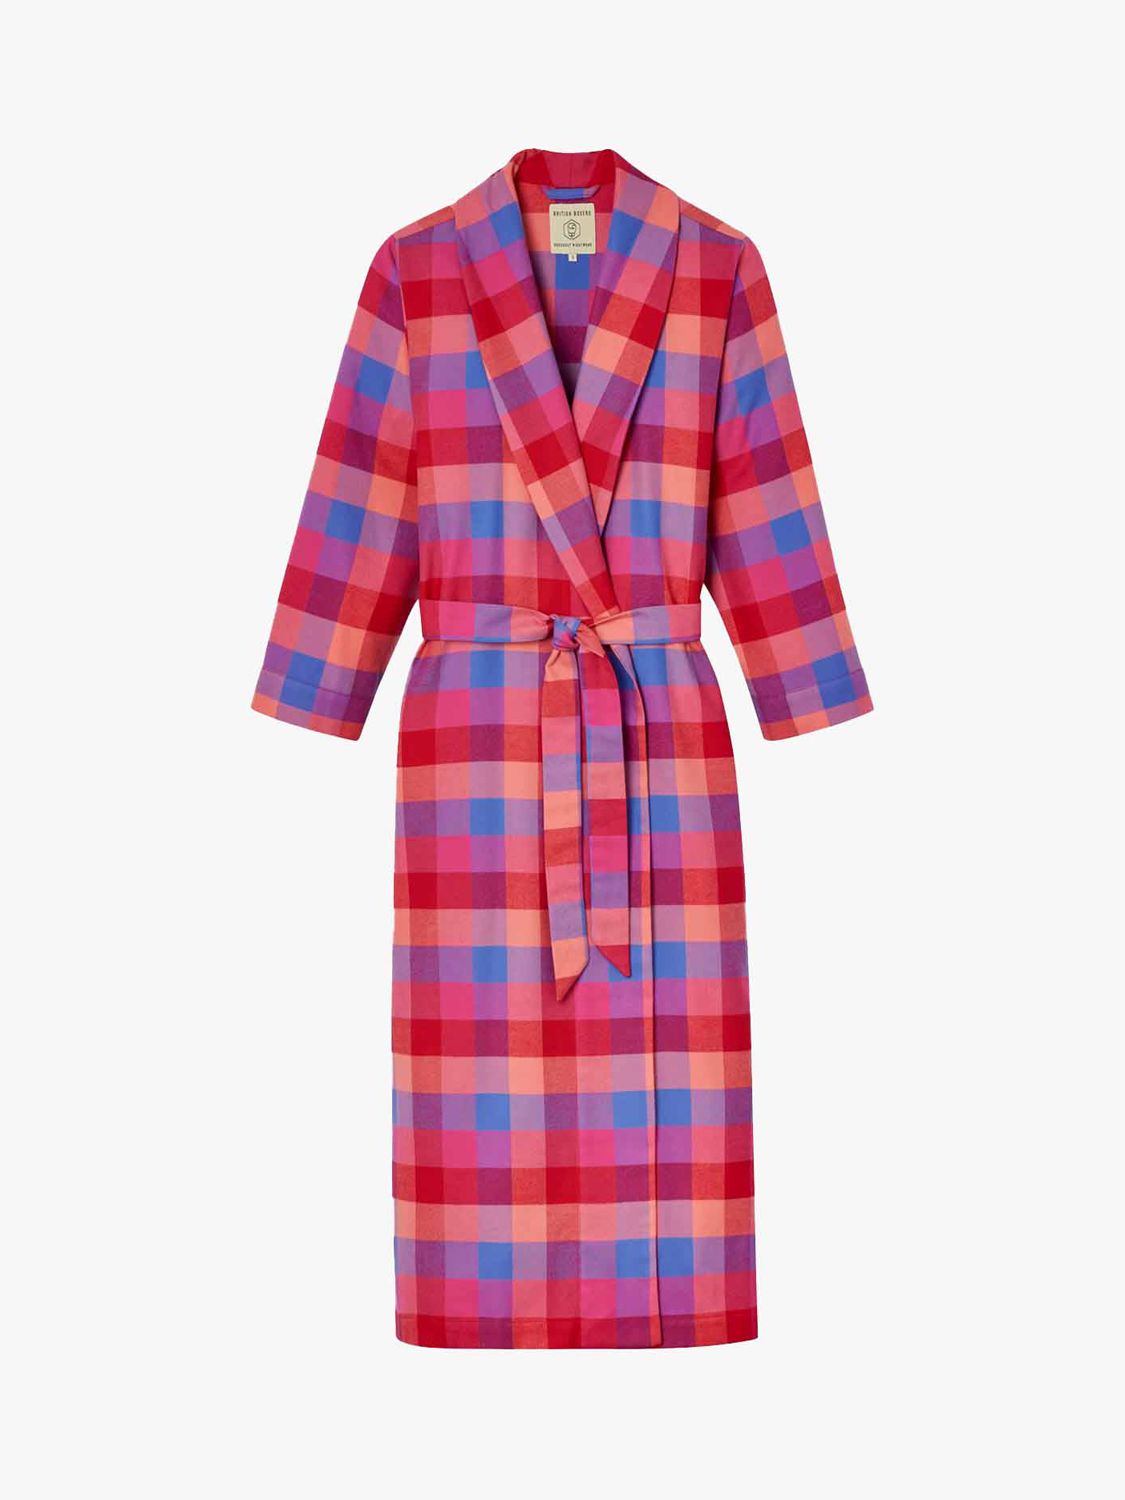 Buy British Boxers Shire Square Brushed Cotton Dressing Gown Online at johnlewis.com